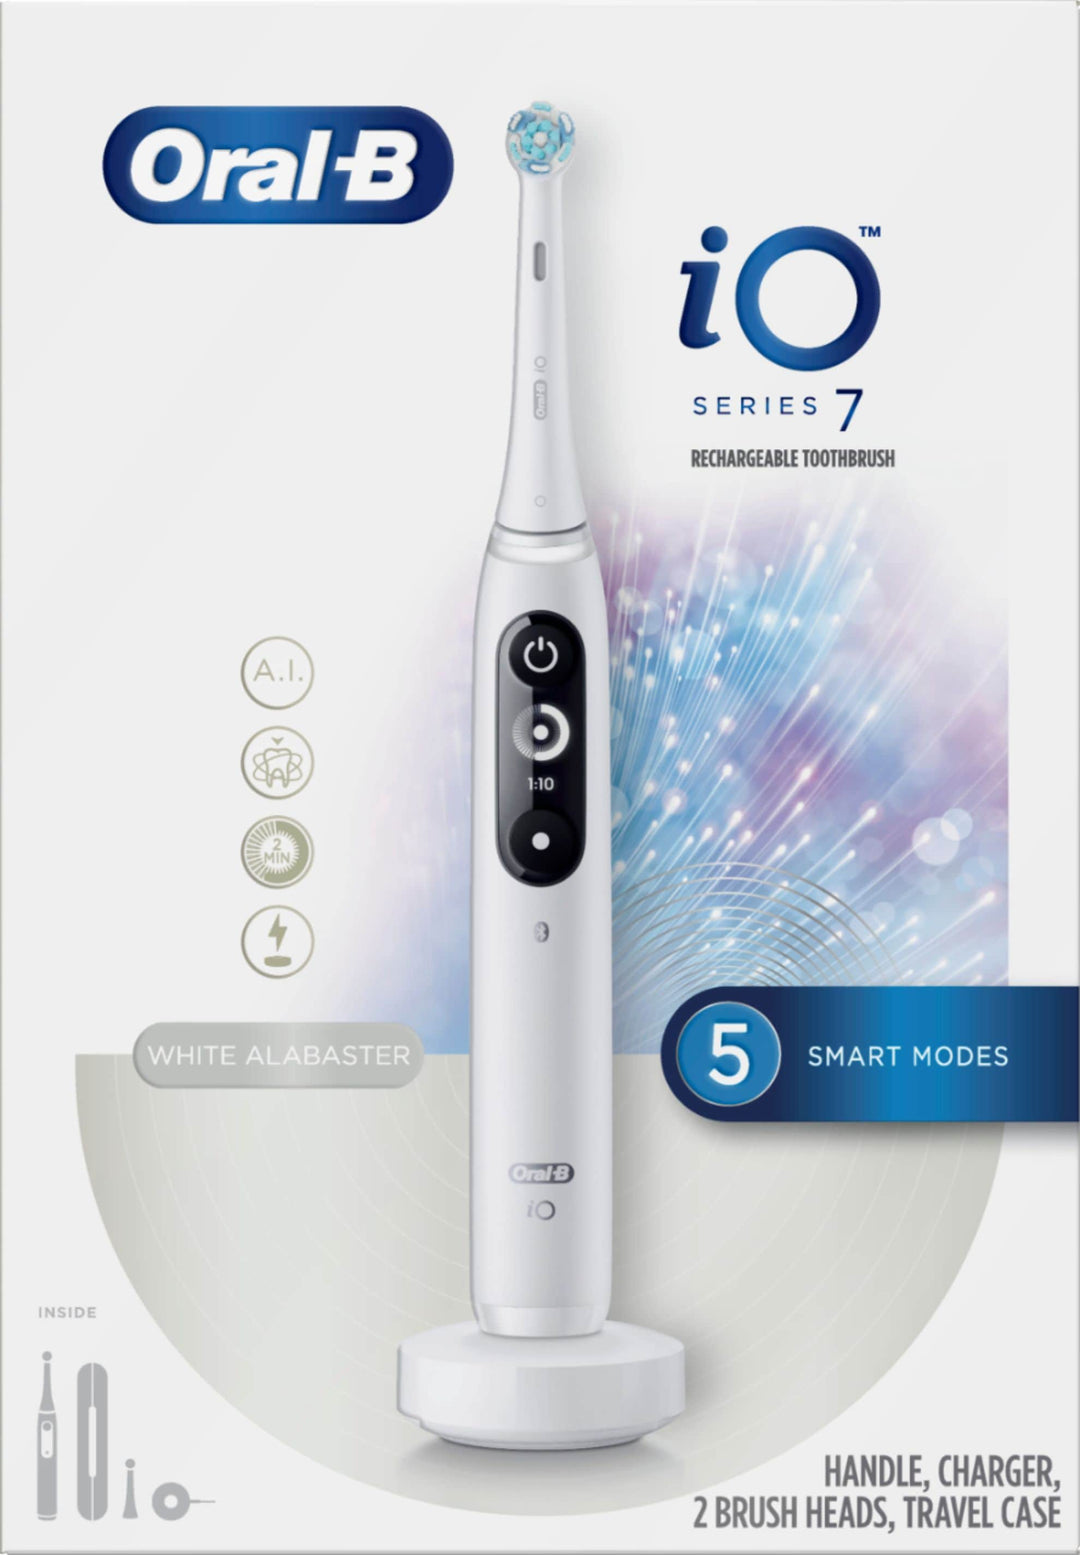 Oral-B - iO Series 7 Connected Rechargeable Electric Toothbrush - White Alabaster_1